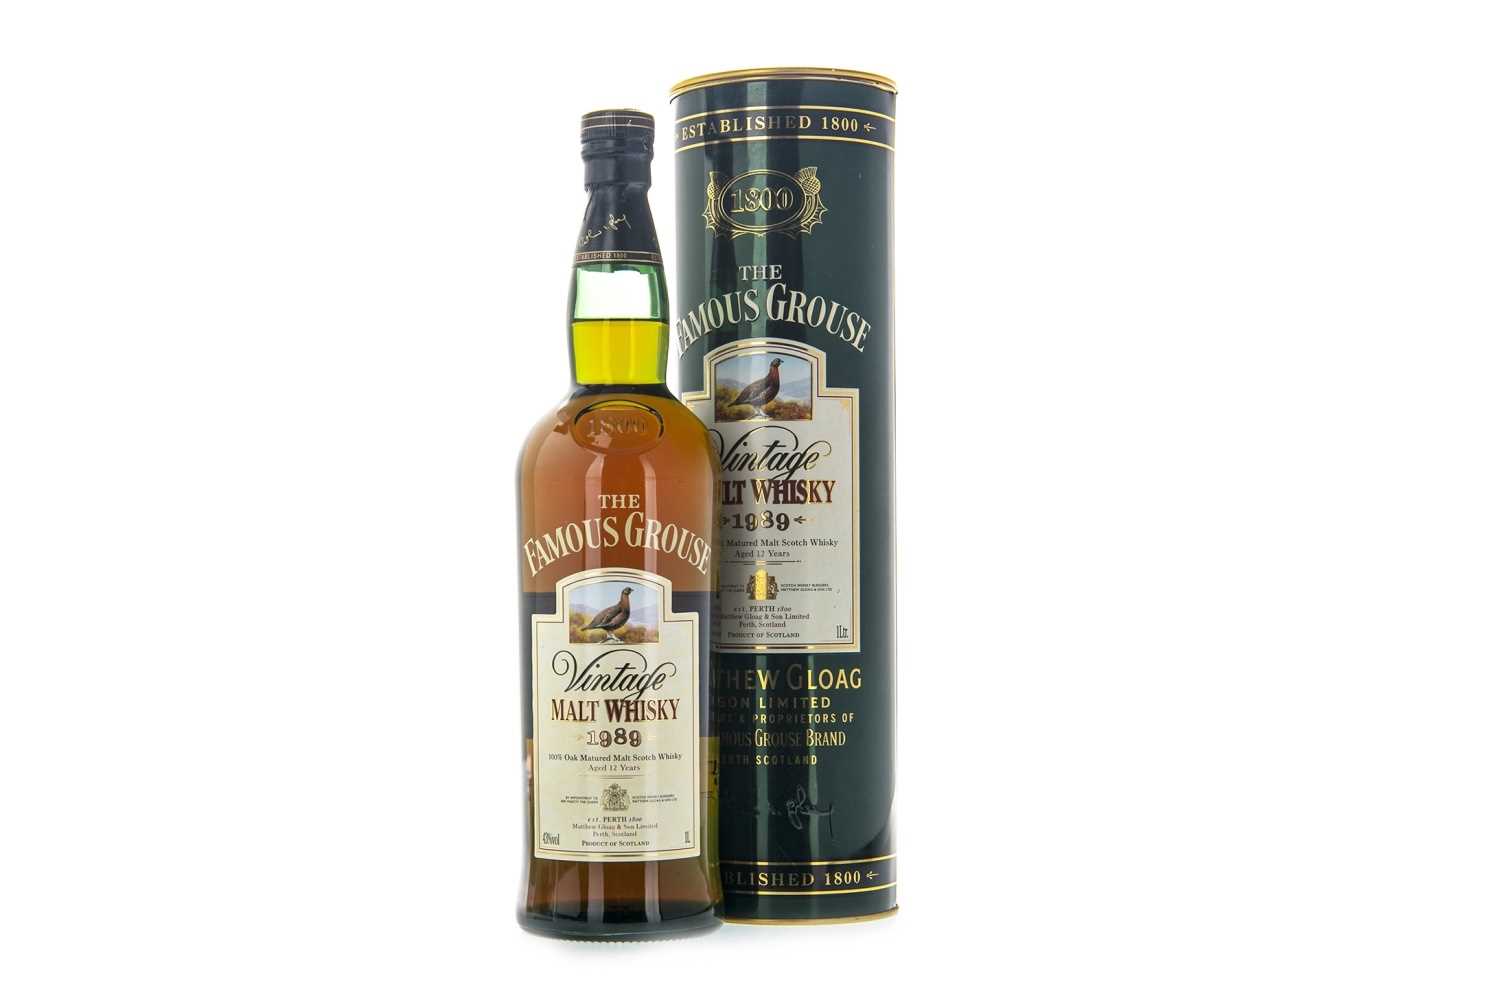 Lot 323 - THE FAMOUS GROUSE 1989 AGED 12 YEARS